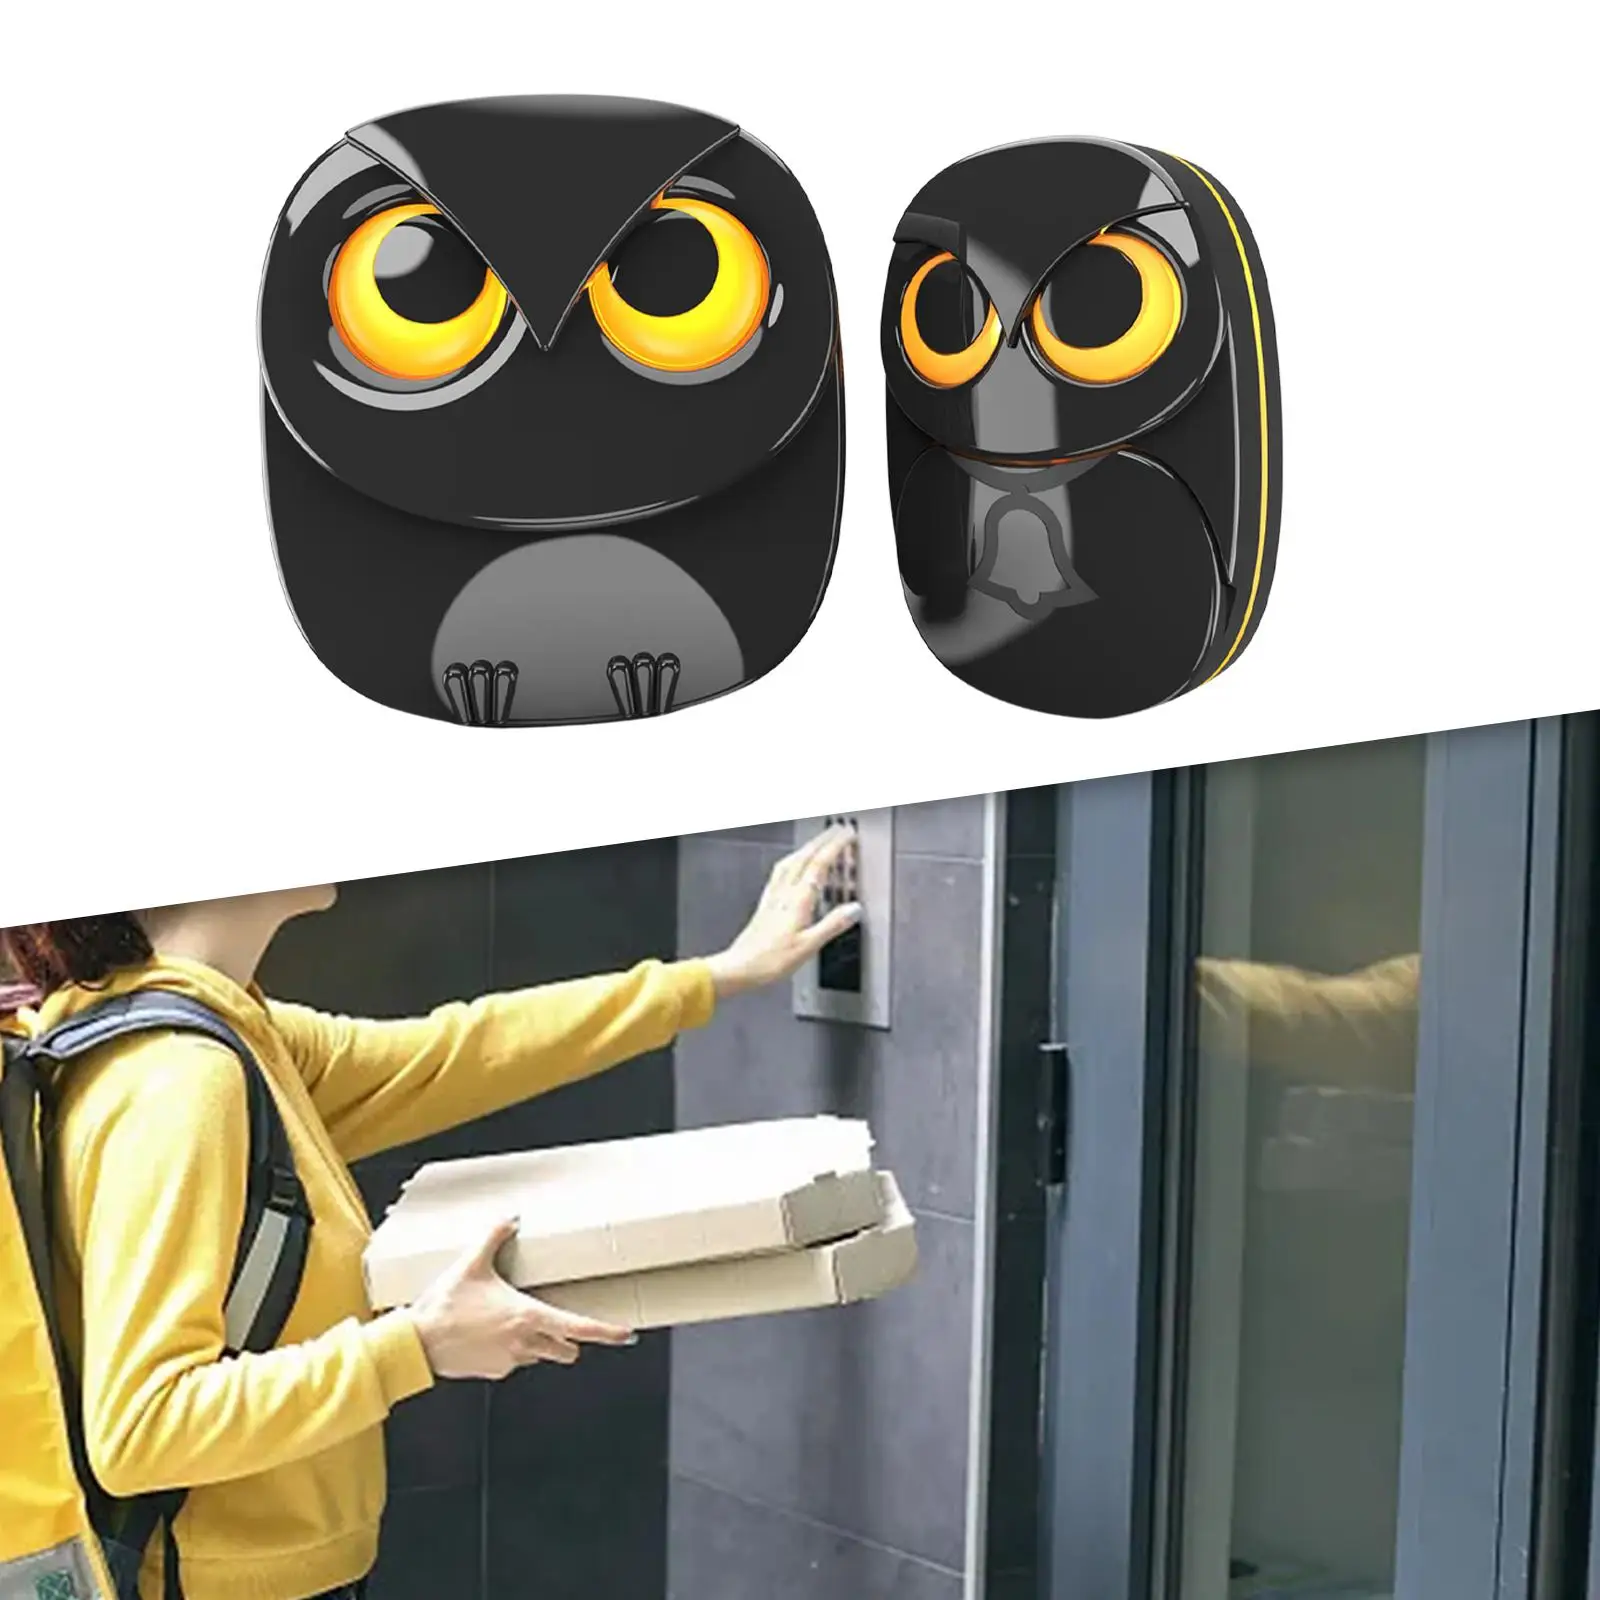 Wireless Driveway Security Alarm Sturdy Simple Using Decoration Supplies Creative Owl Shape for Home Shed Office Garage UK Plug